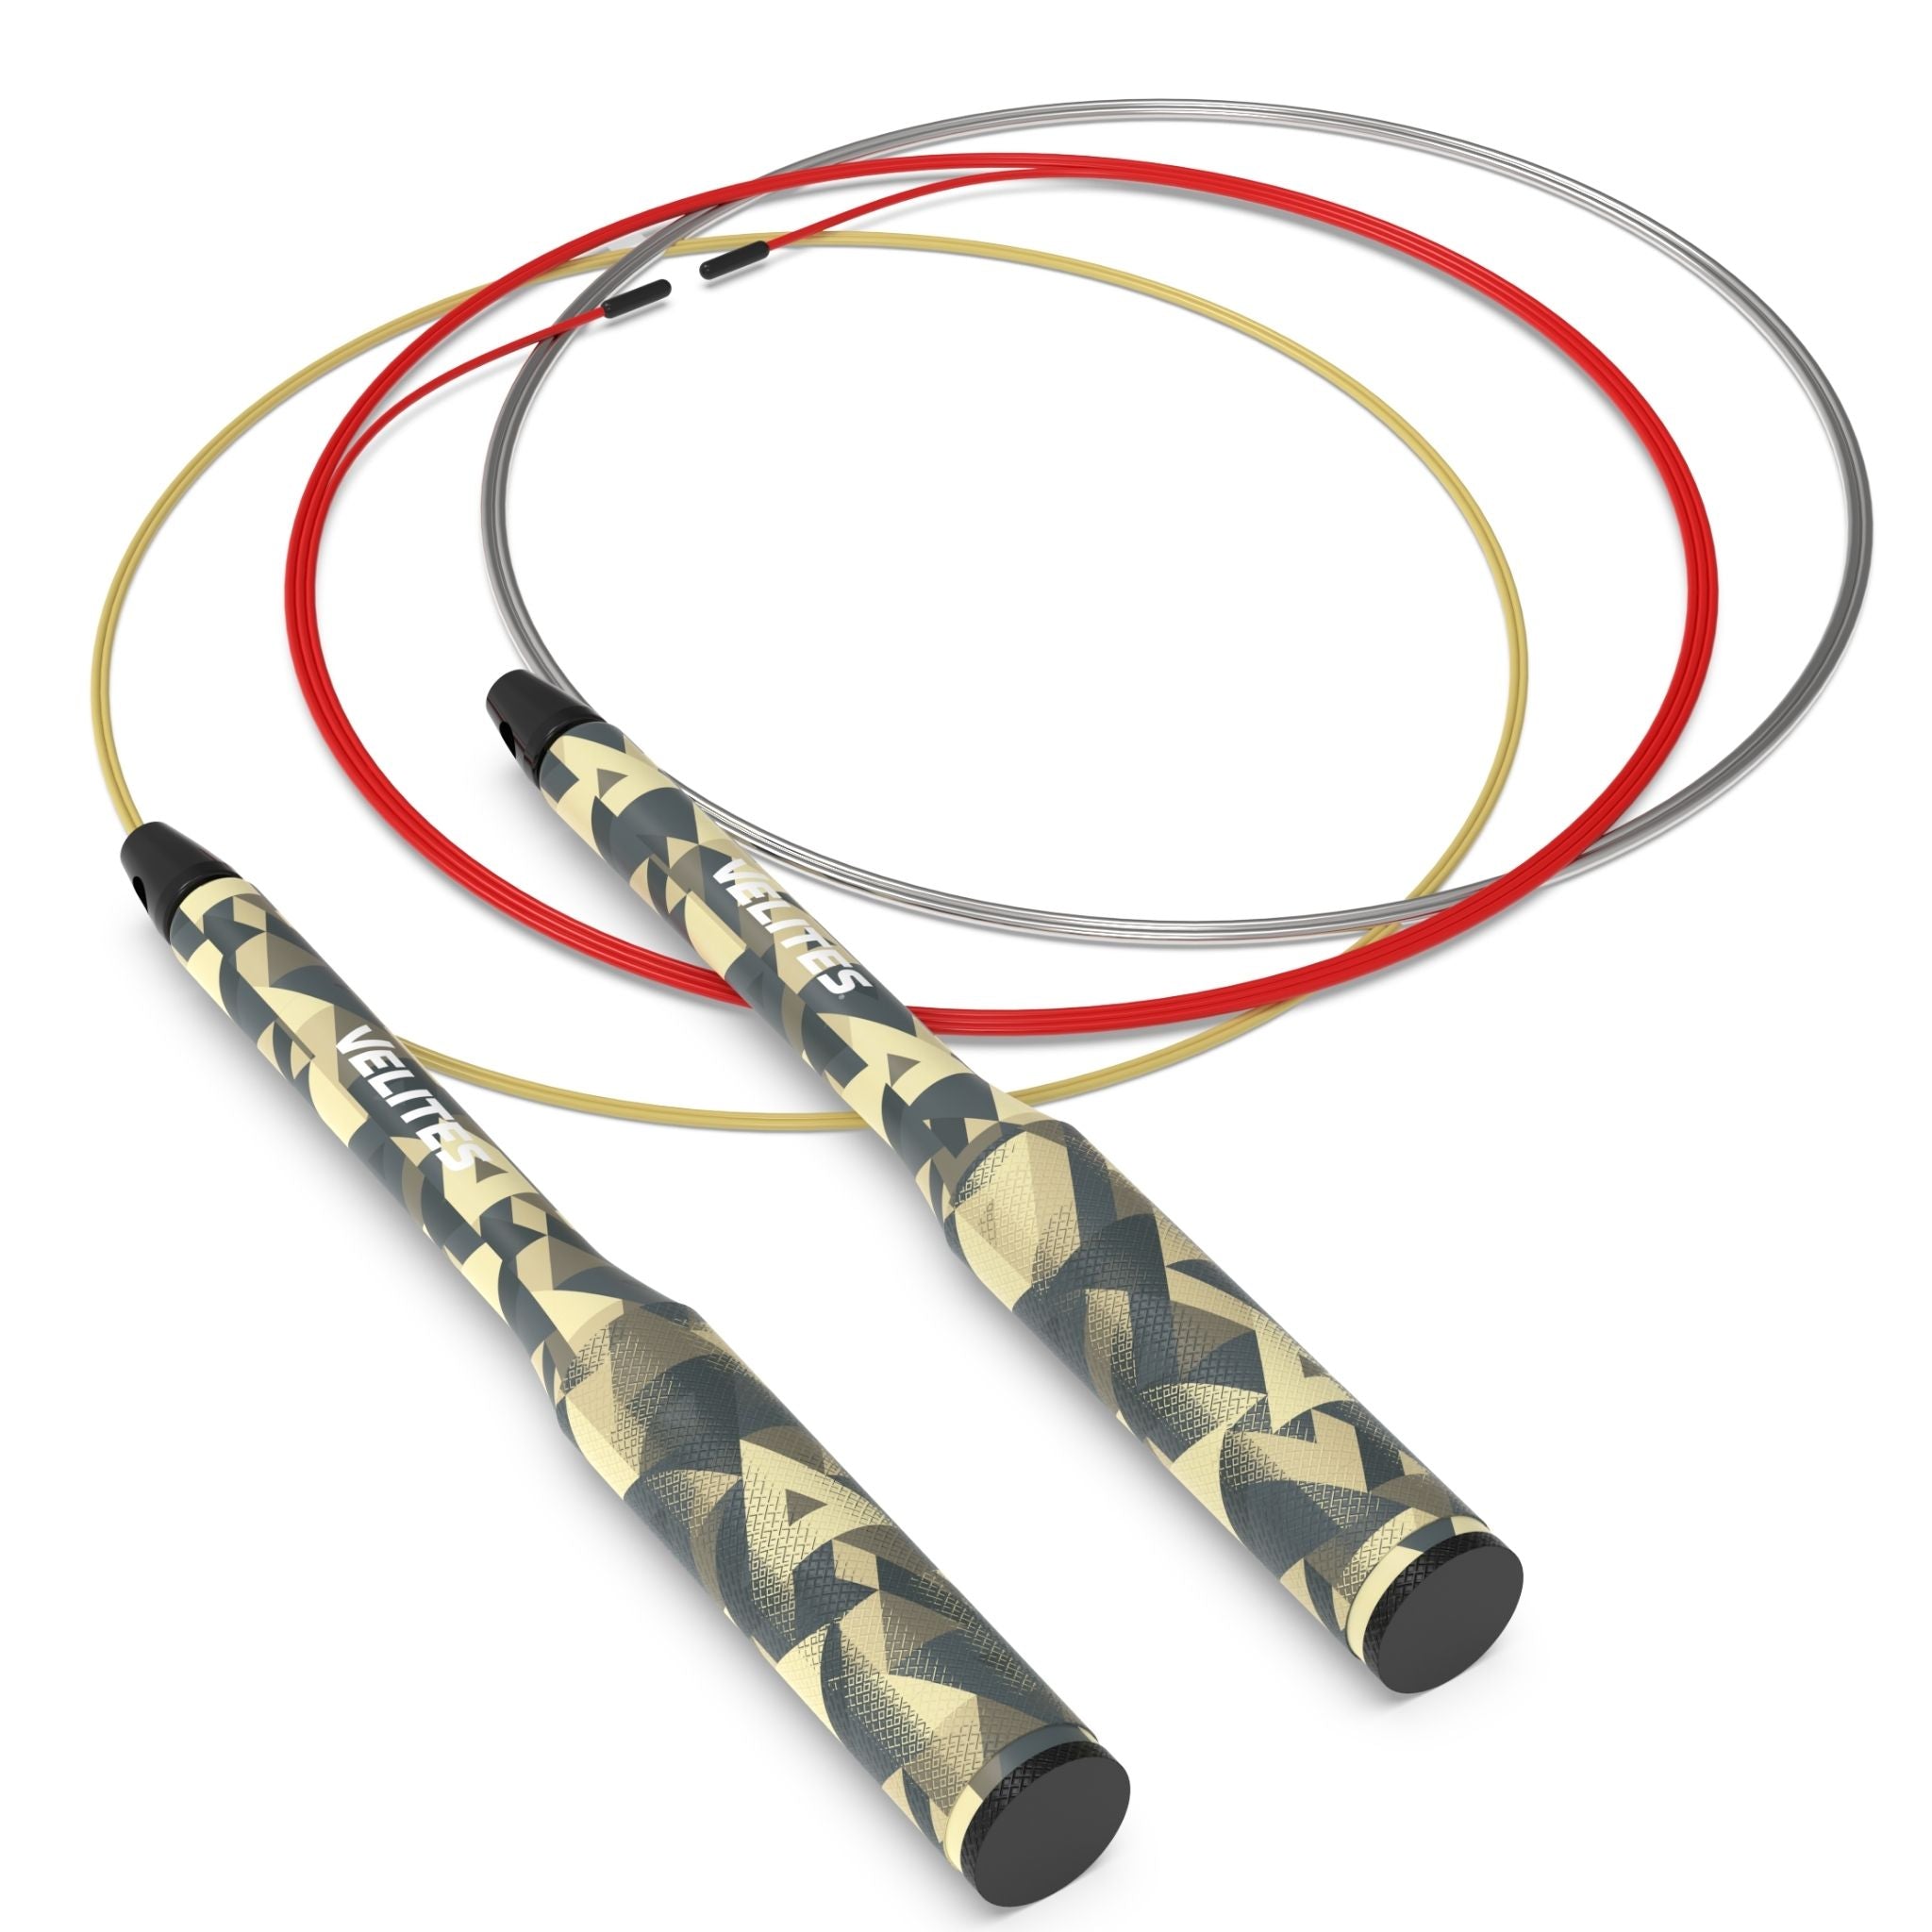 Jump Rope Fire 2.0 + Cables Pack